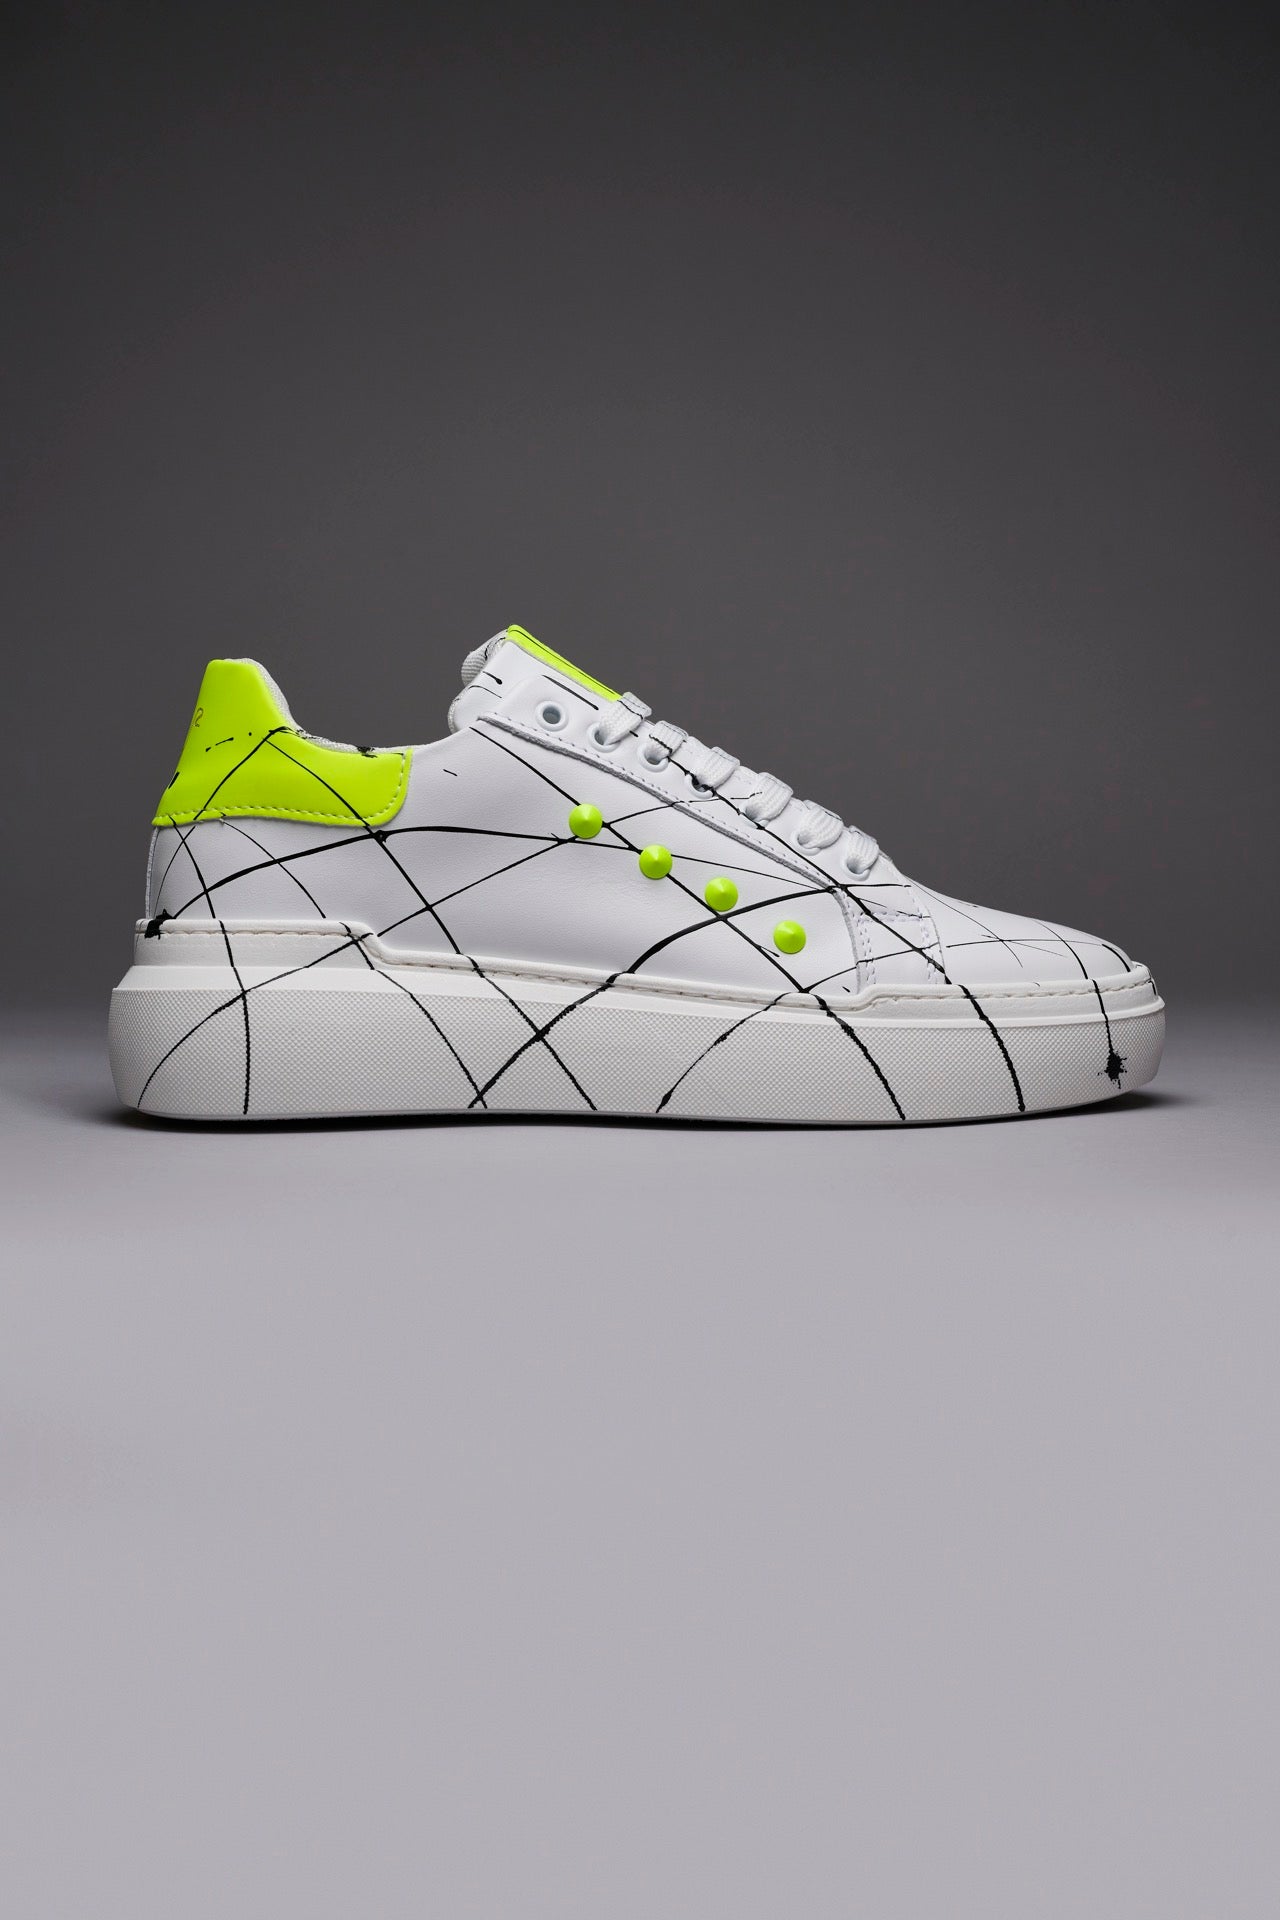 VEGA - Sneakers with high back sole and yellow fluo studs with splashes of paint